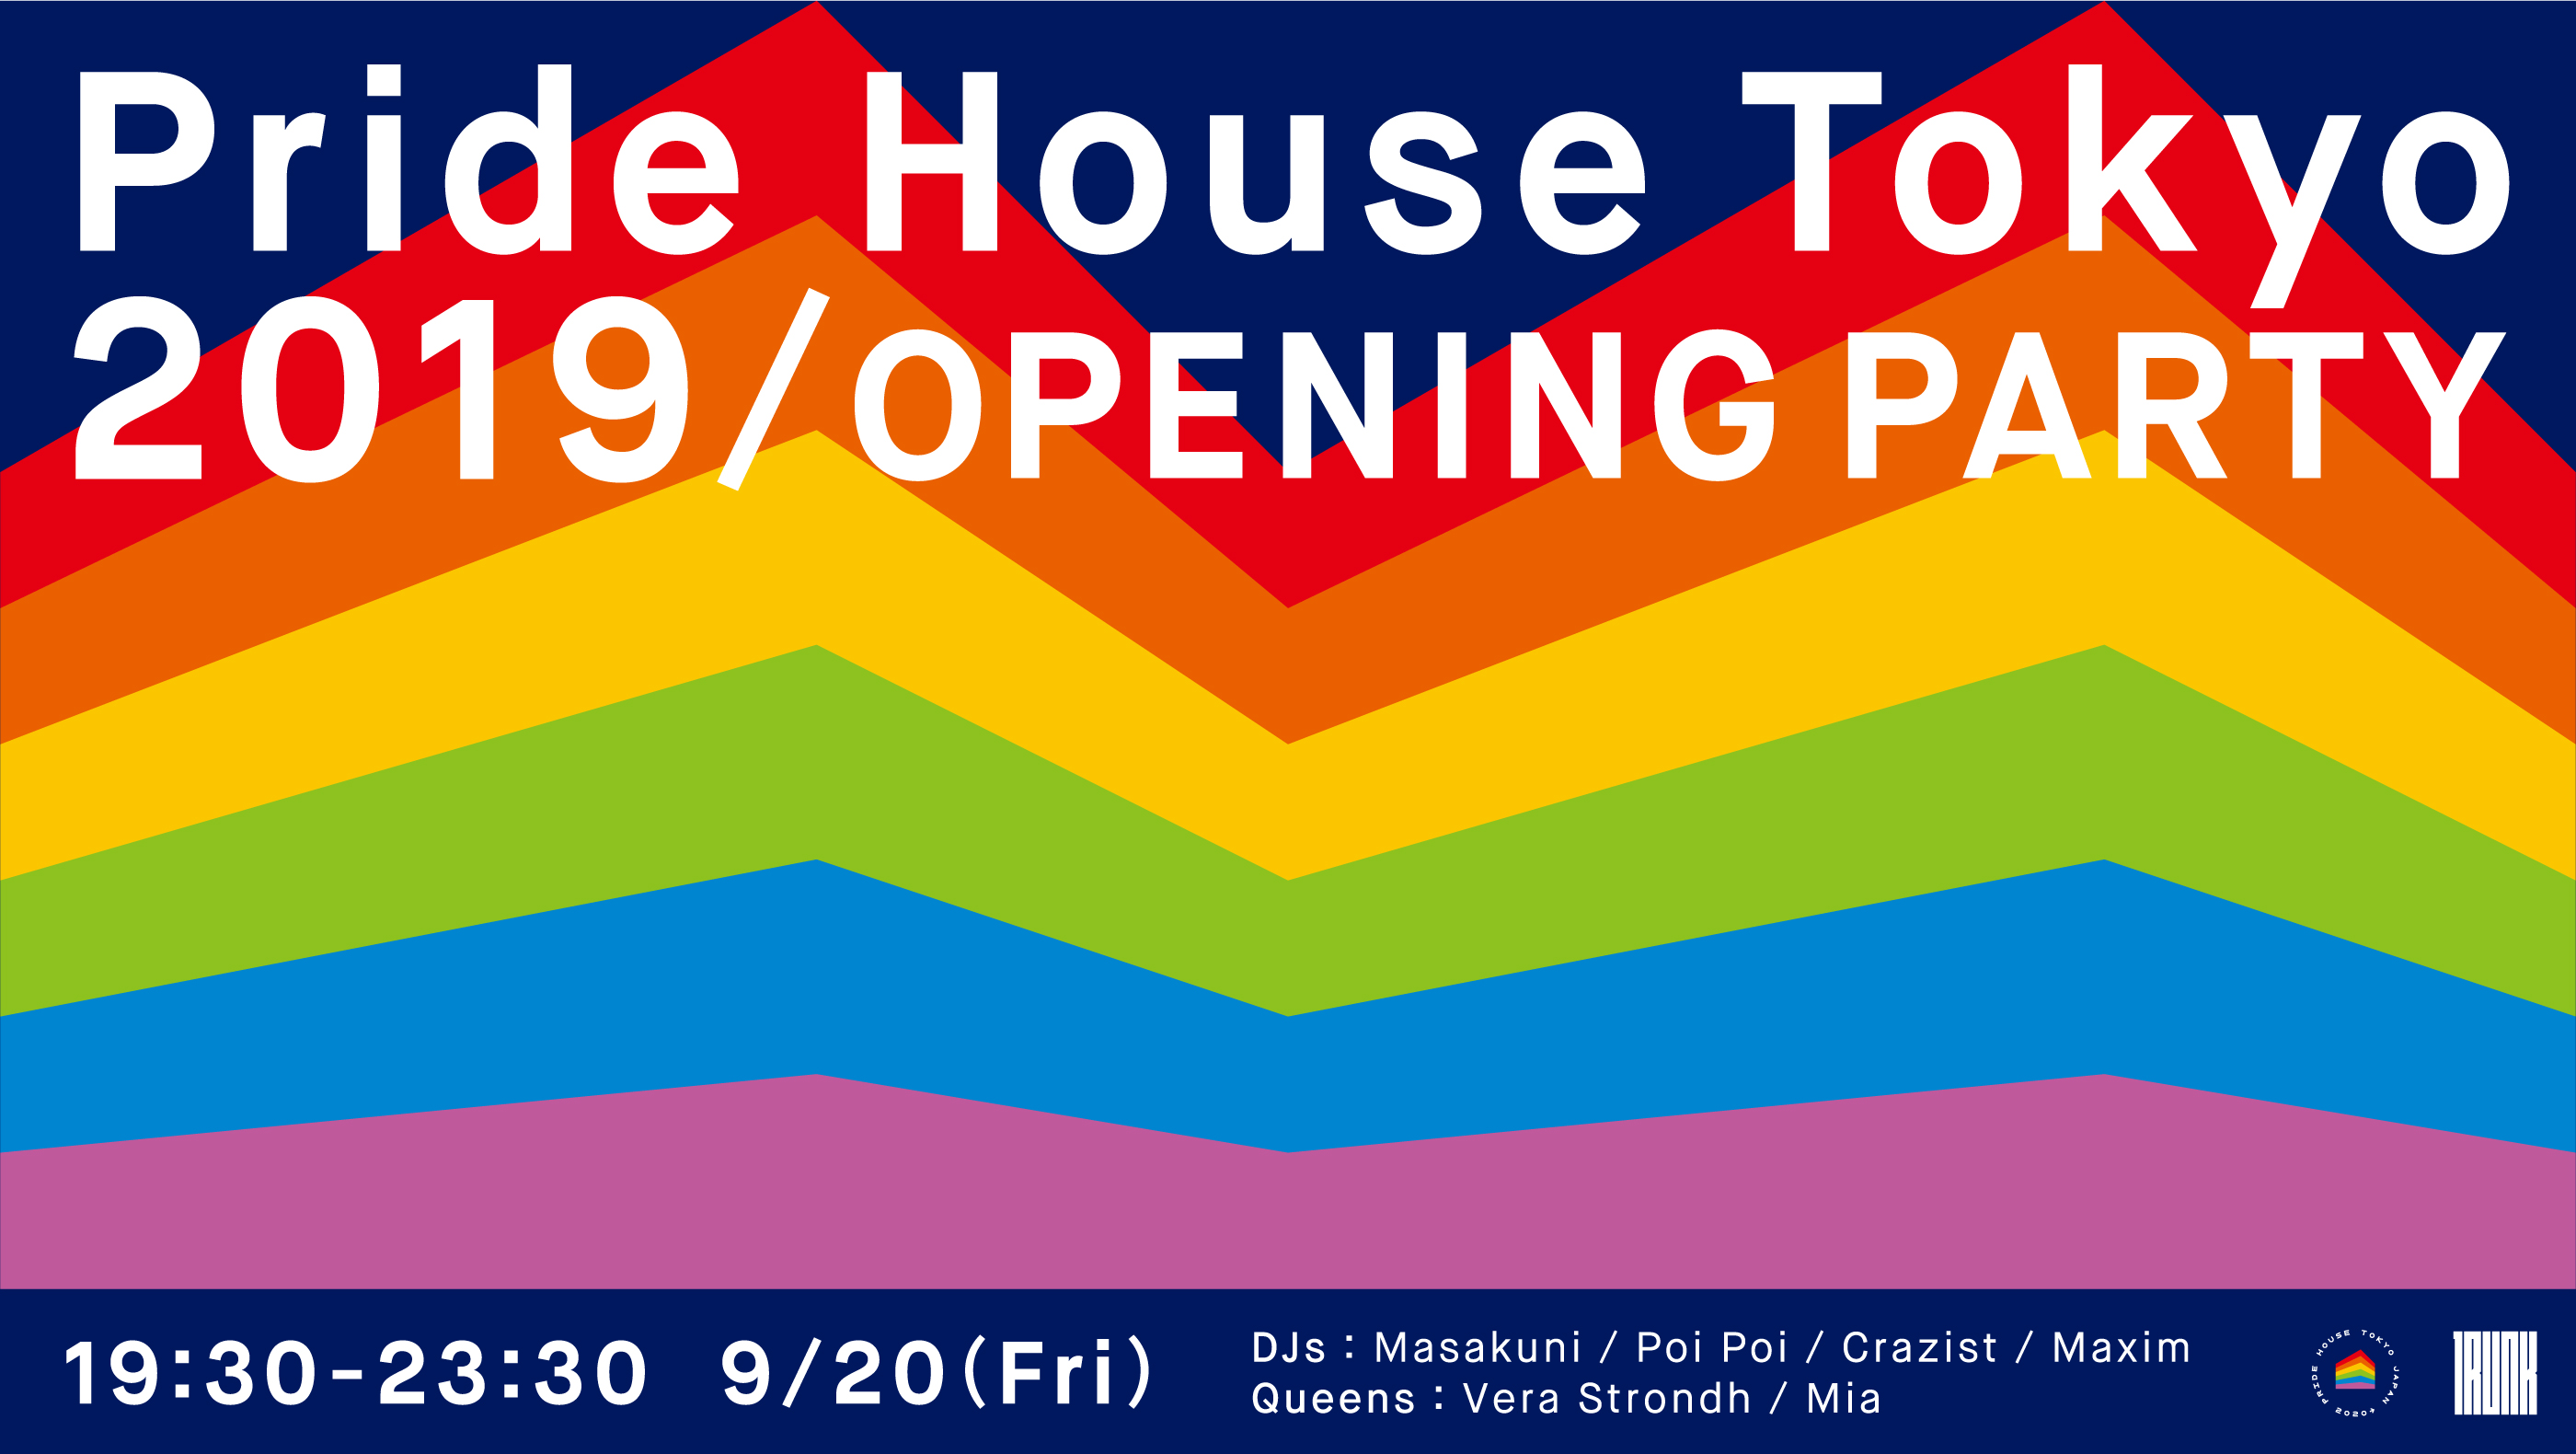 Pride House Tokyo 2019 Opening Party